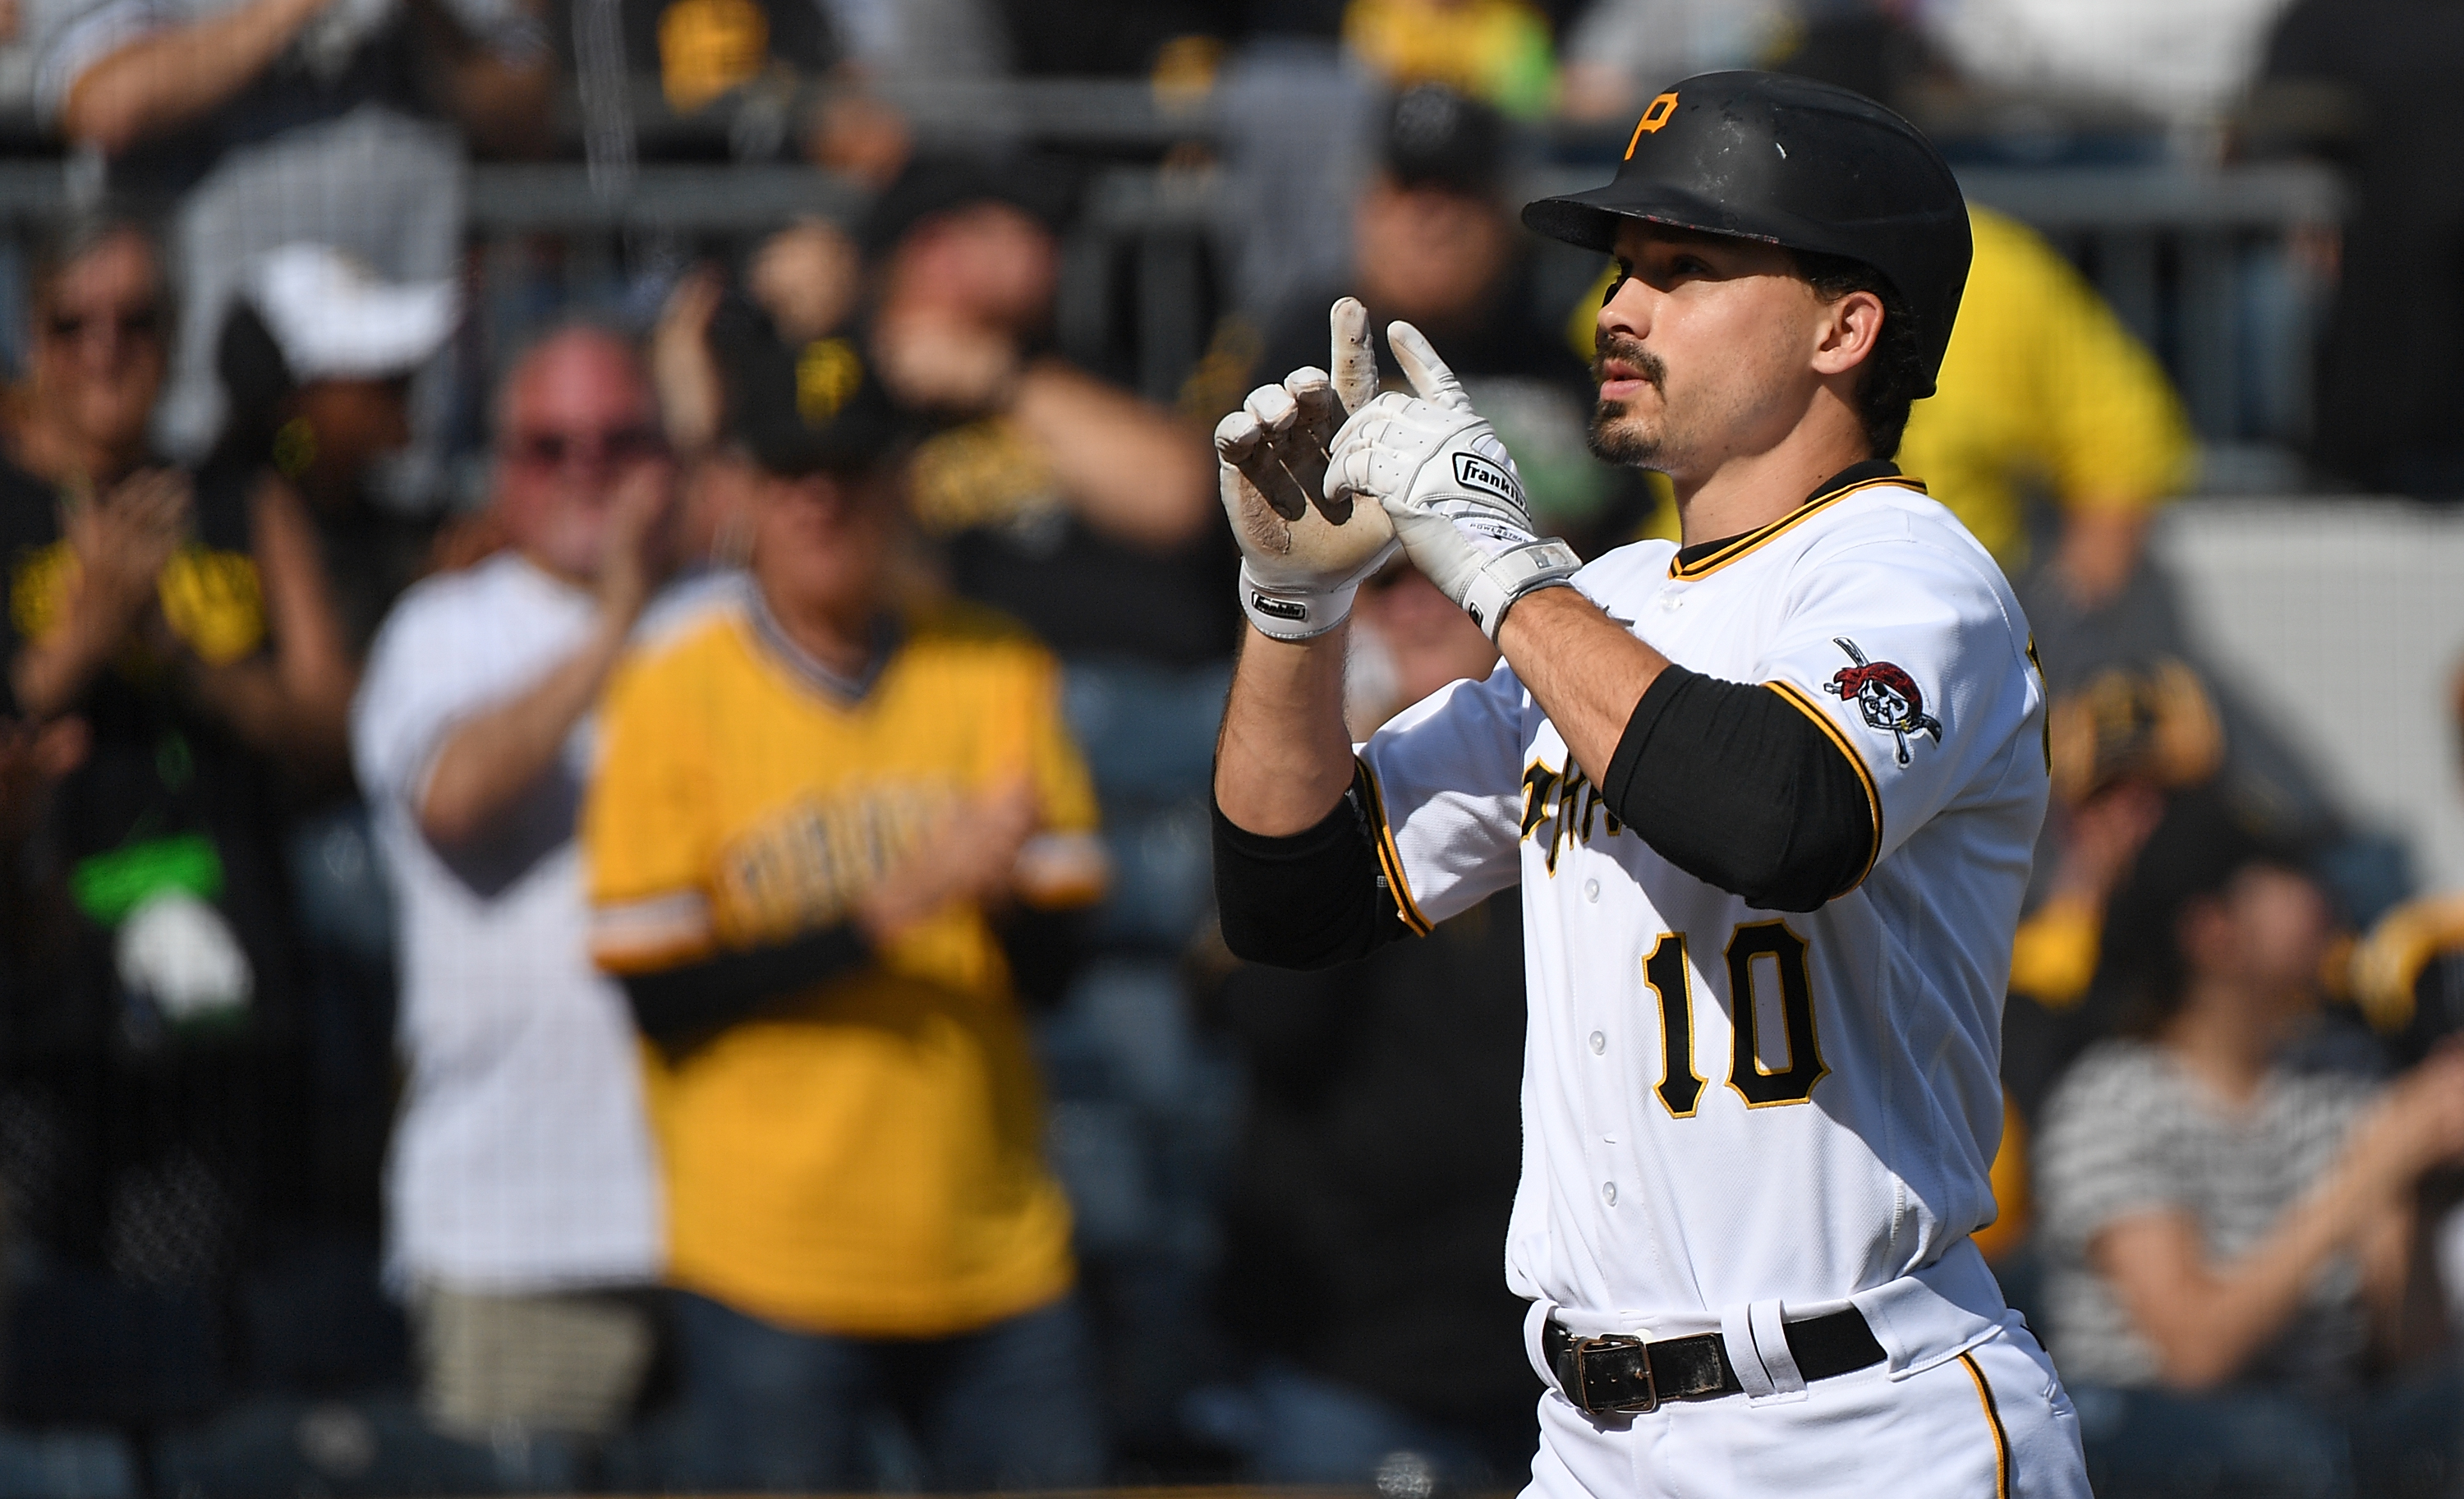 Bryan Reynolds of the Pittsburgh Pirates reacts as he crosses home plate after hitting a solo home run in the sixth inning during the game against the Chicago Cubs at PNC Park on September 25, 2022 in Pittsburgh, Pennsylvania.